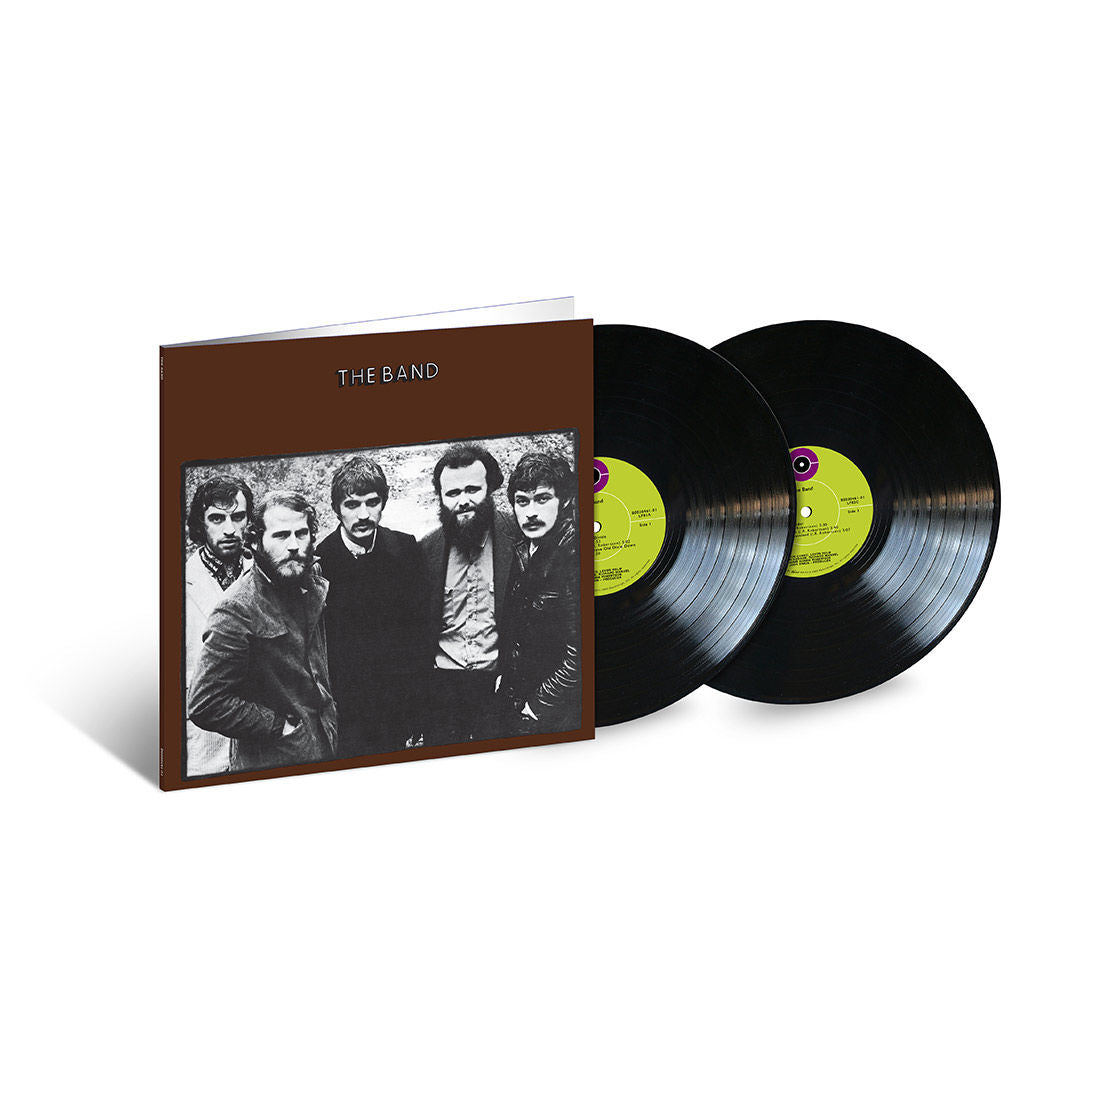 The Band - The Band (50th Anniversary): Vinyl 2LP